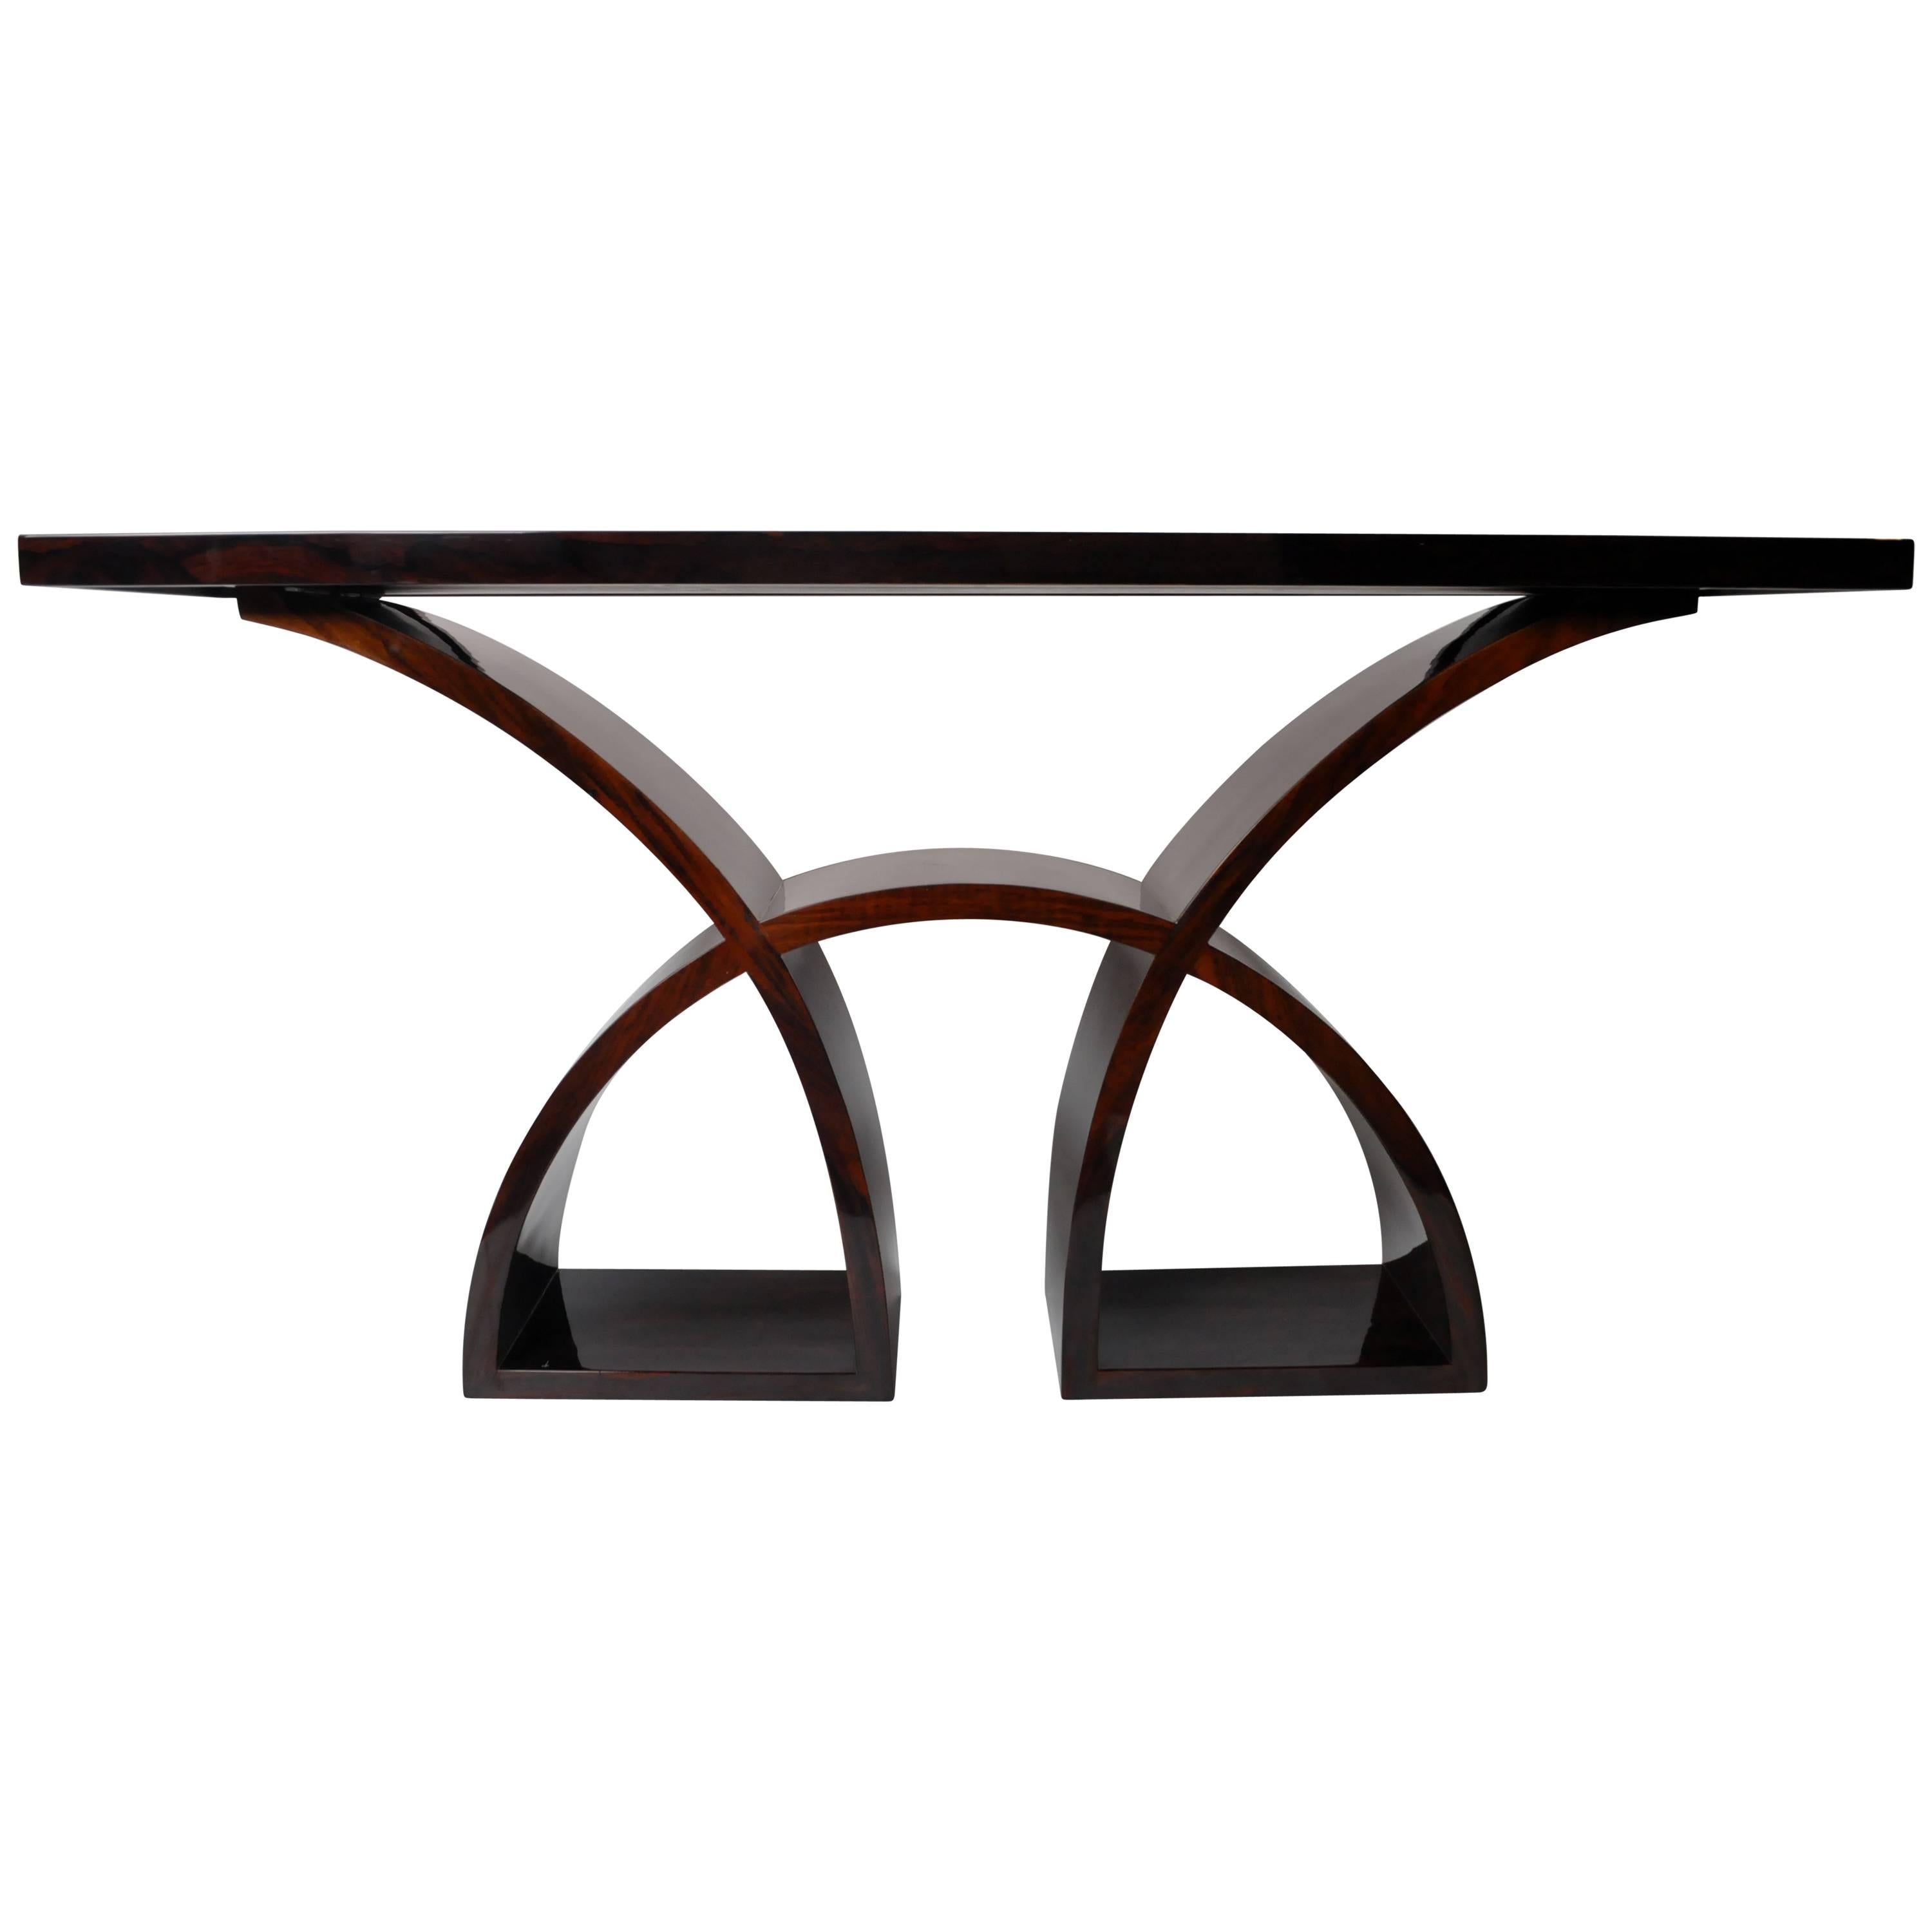 Art Deco Style "Ribbon" Console Table with Geometric Base